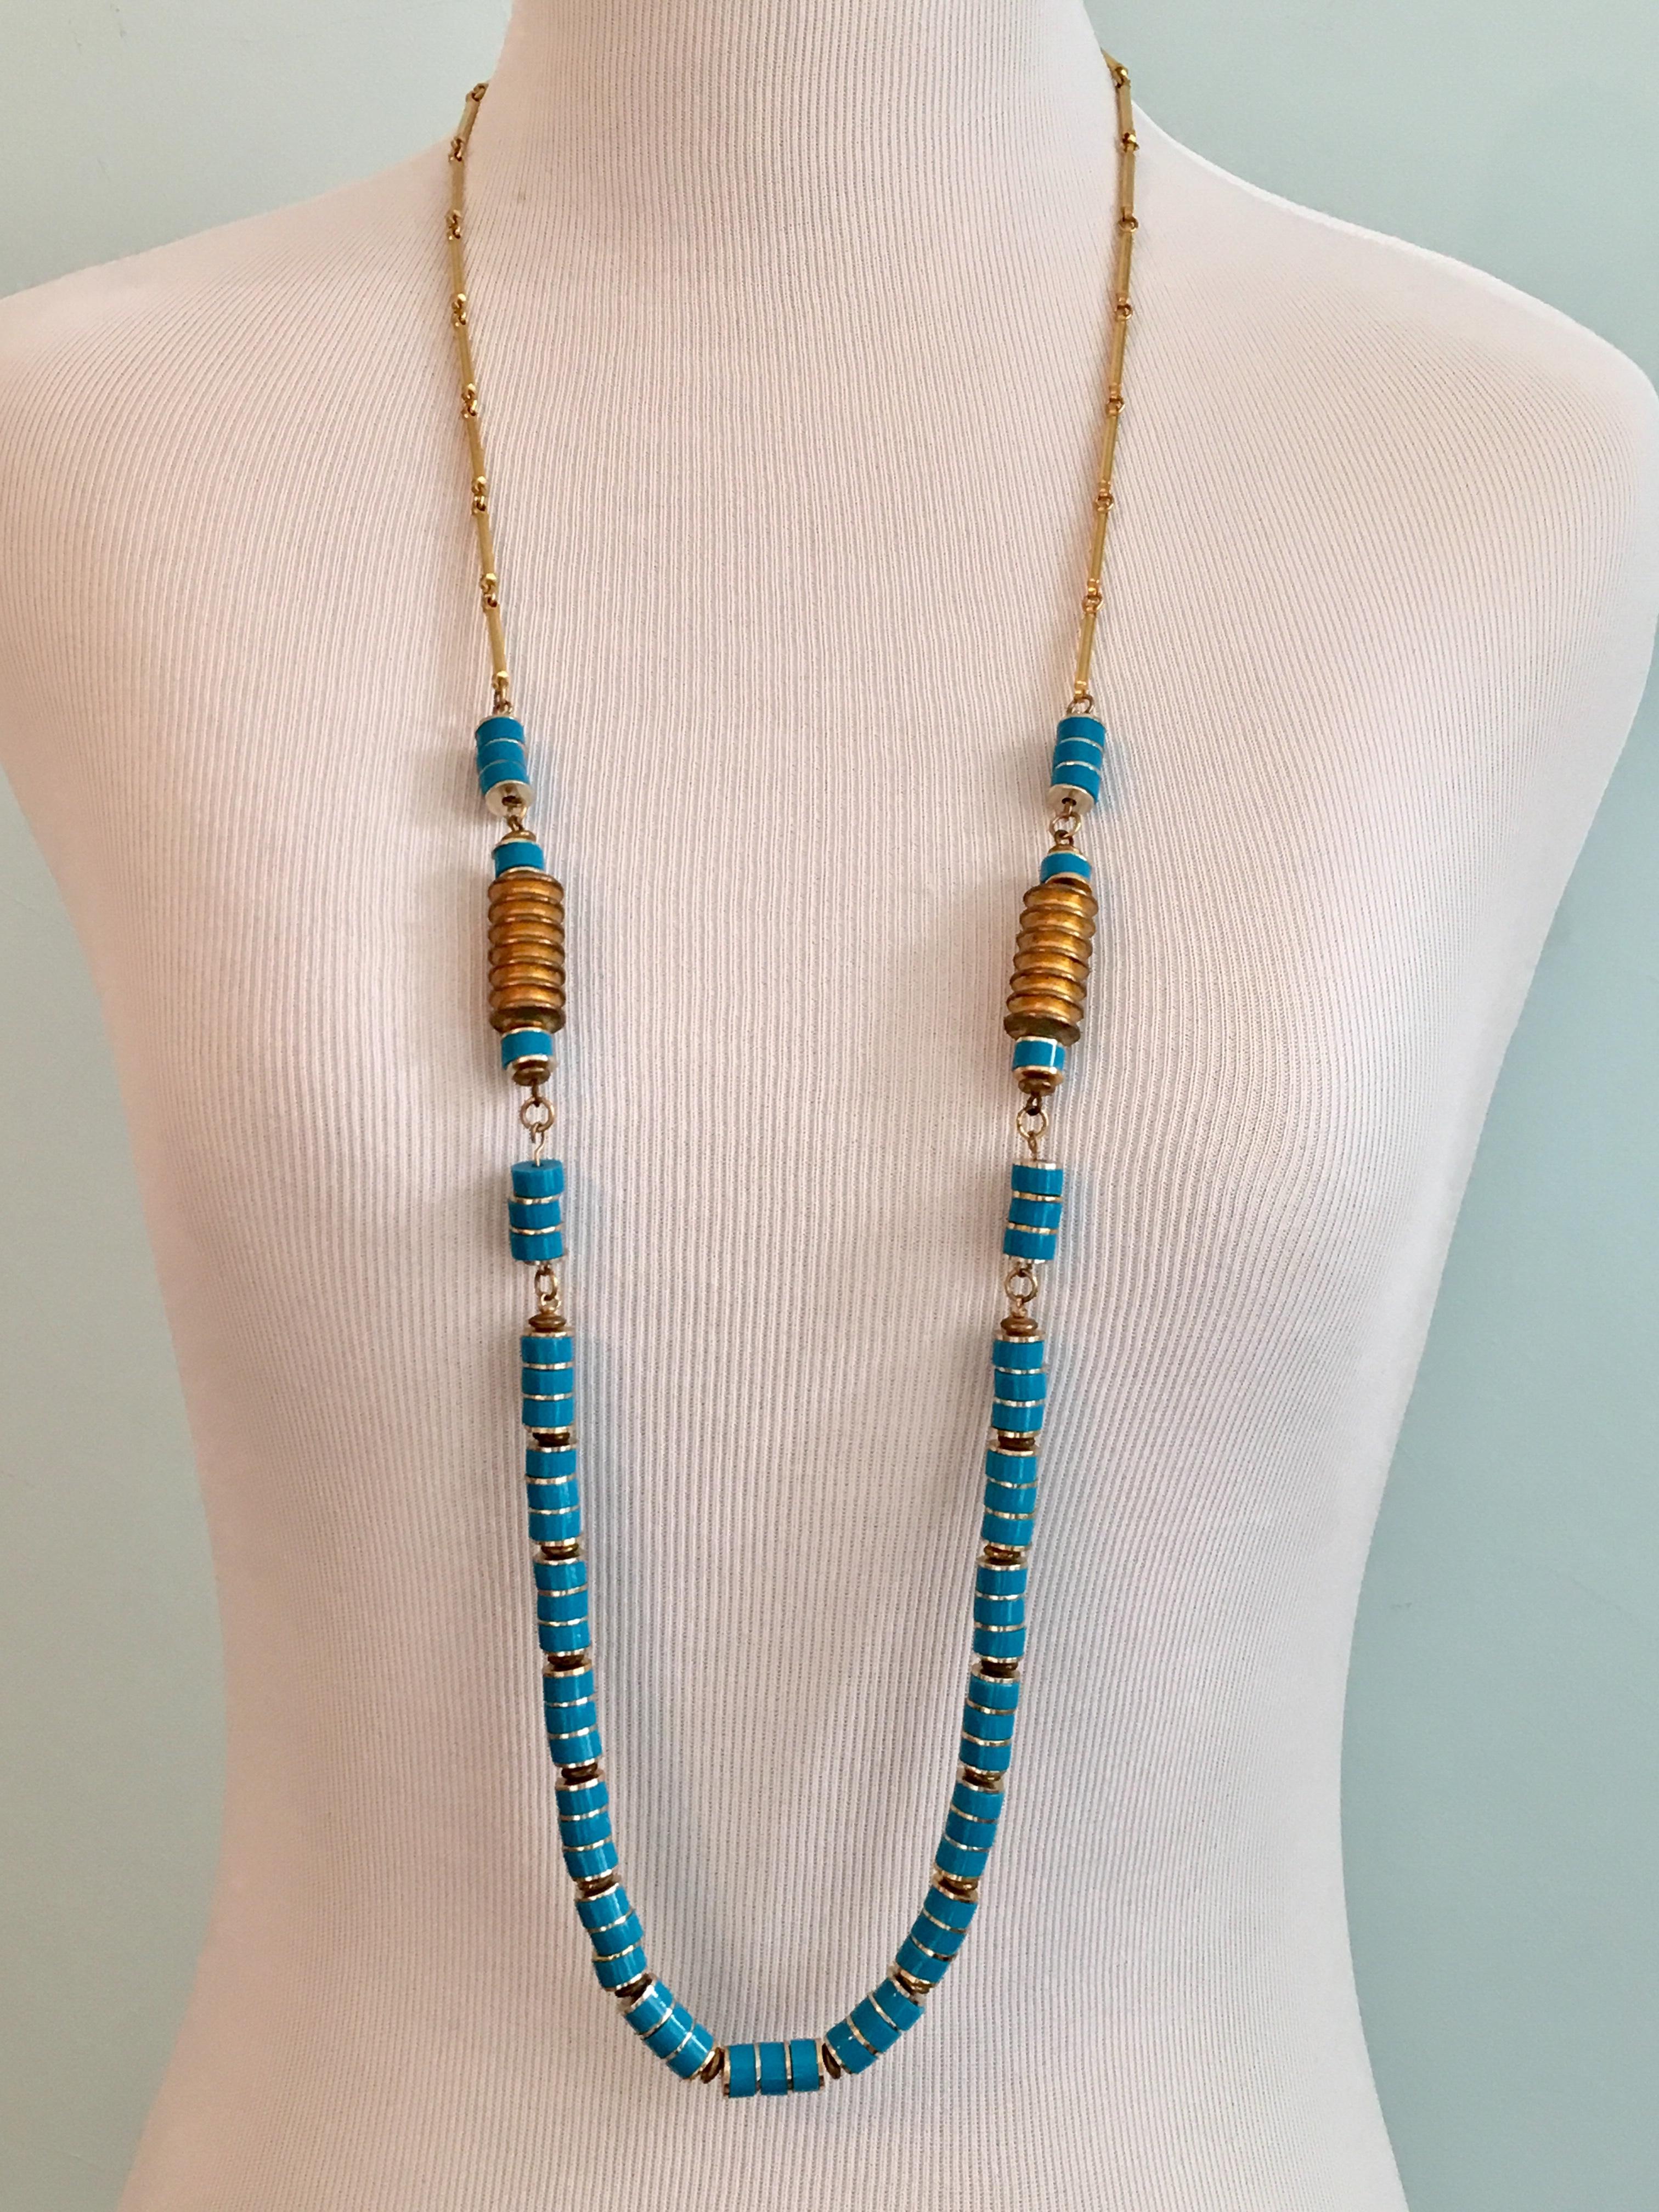 This is a 1970s Pierre Cardin gold tone necklace made up of turquoise colored resin beads. It is 38 inches long and fastens with an amazing Pierre Cardin logo clasp which can be worn at the back or to the side. Truly a stunning piece which can be